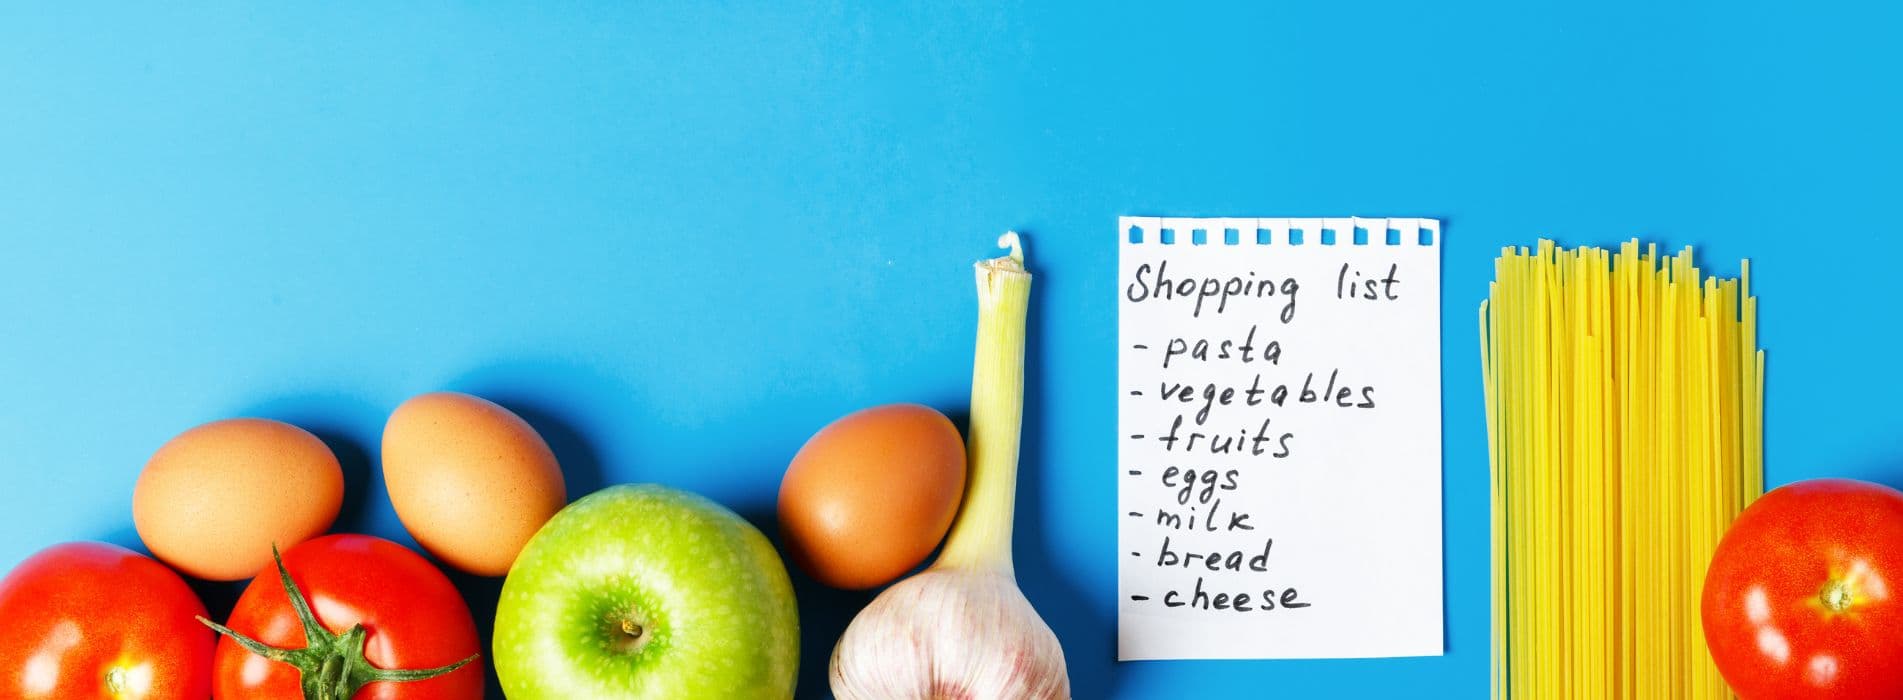 Shopping list for weight loss